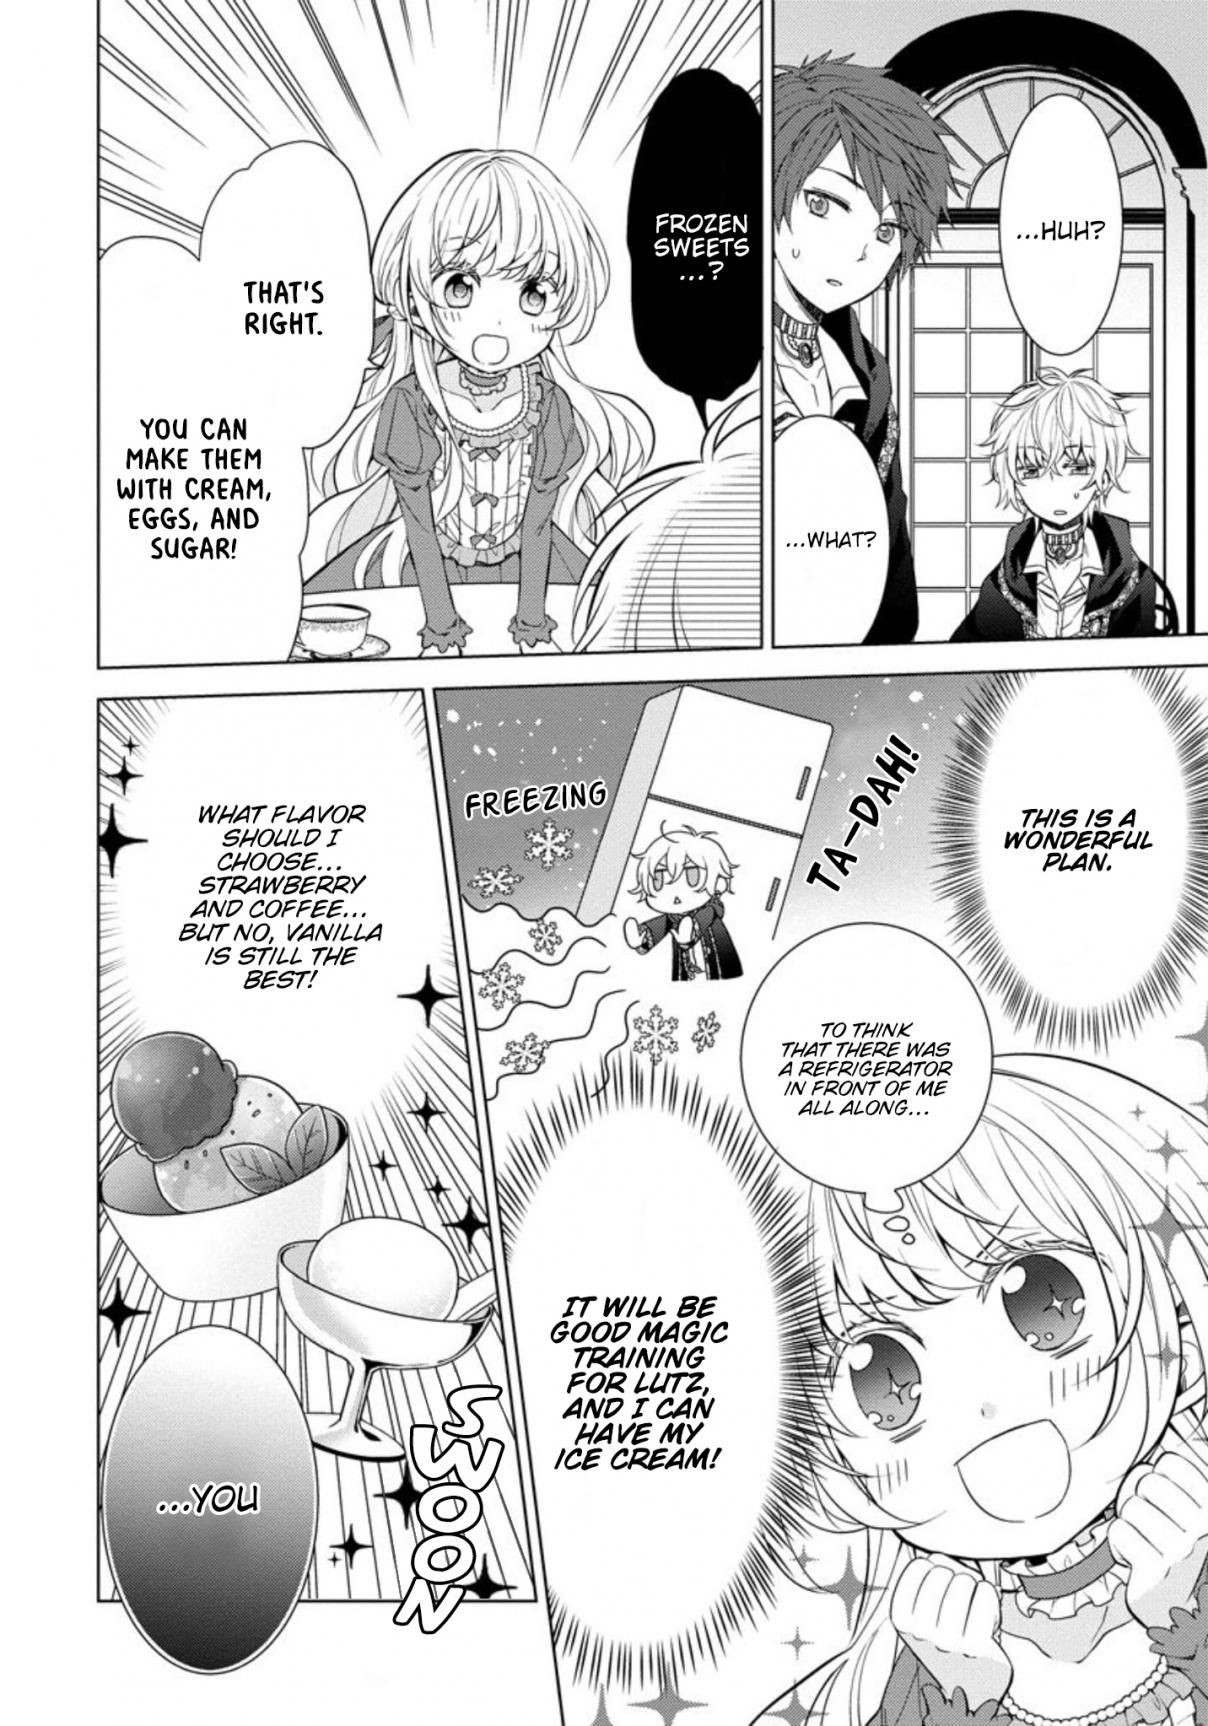 The Reincarnated Princess Strikes Down Flags Today as Well Vol. 1 Ch. 6